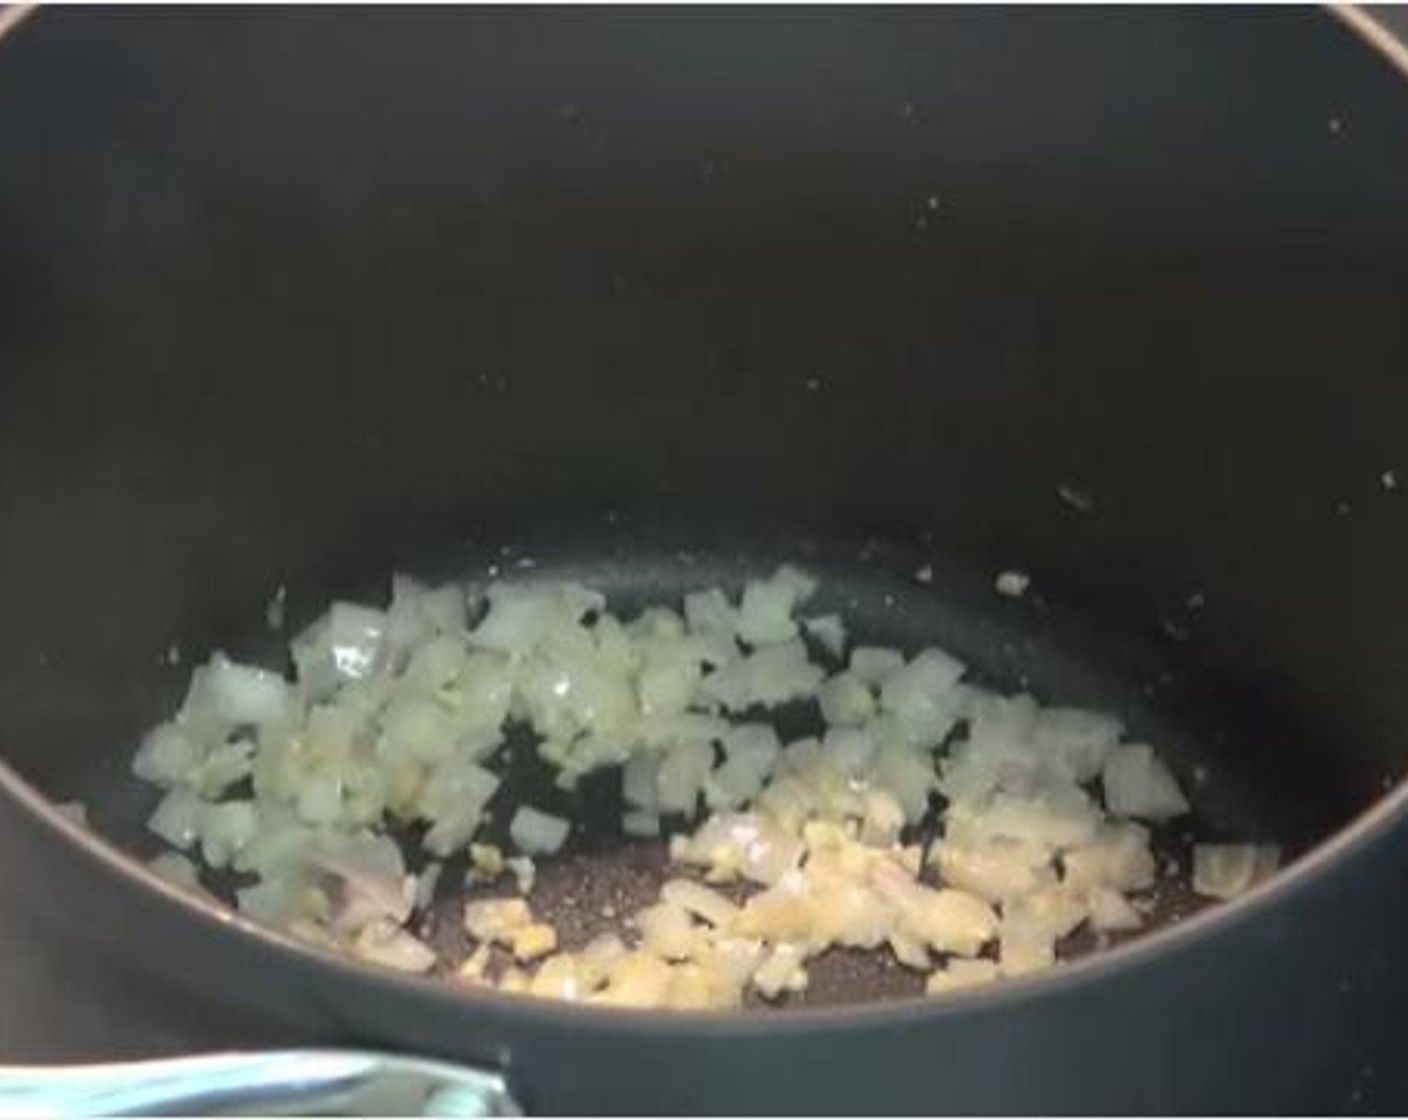 step 1 Into a large pot, add the Olive Oil (as needed). Over medium heat, add the Yellow Onion (1) and Garlic (2 cloves). Cook for 3 minutes until the onions are nice and soft.